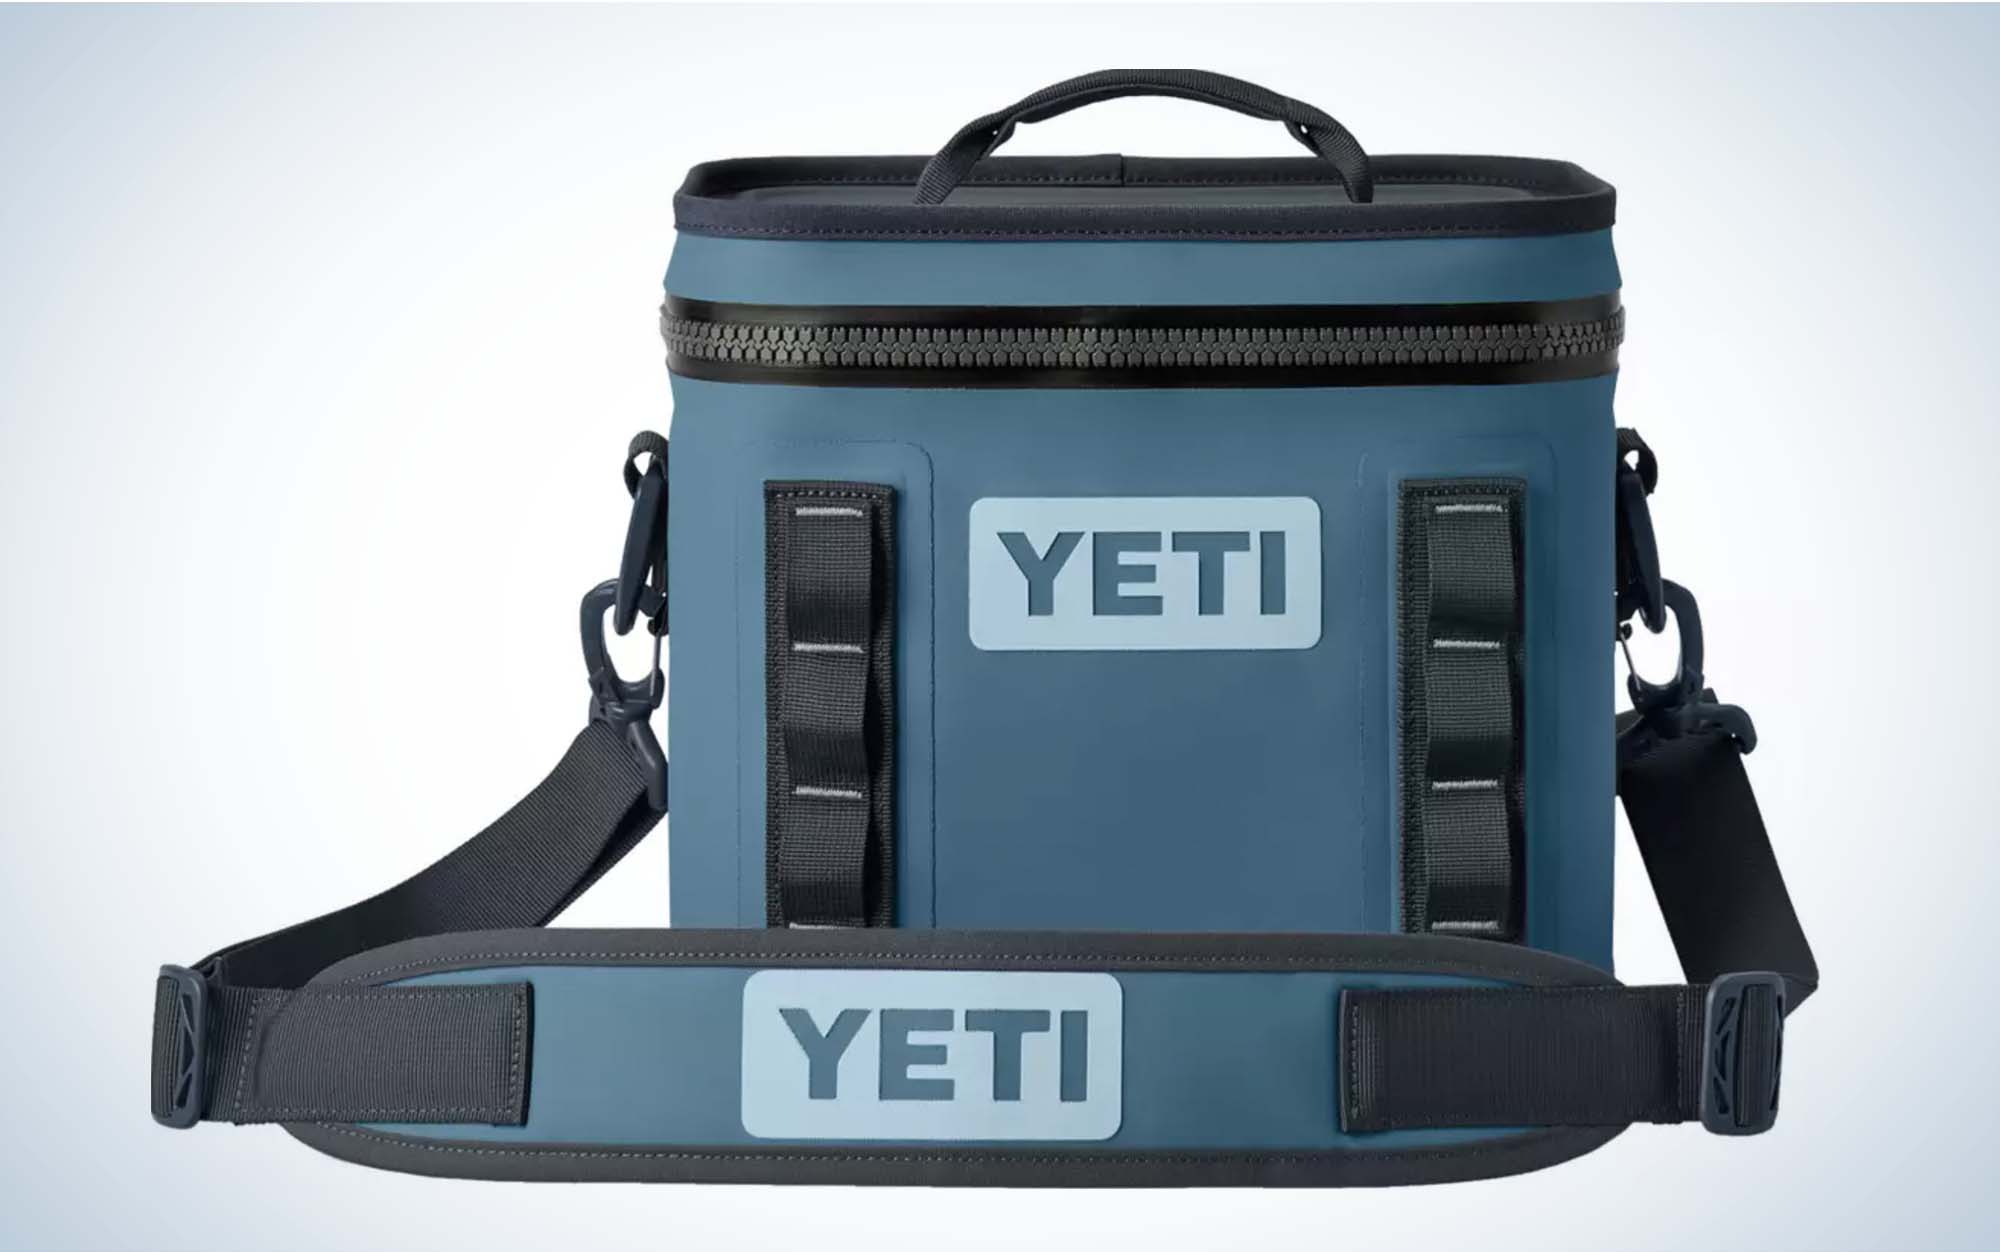 Best Yeti Ice Chest for sale in Grapevine, Texas for 2023